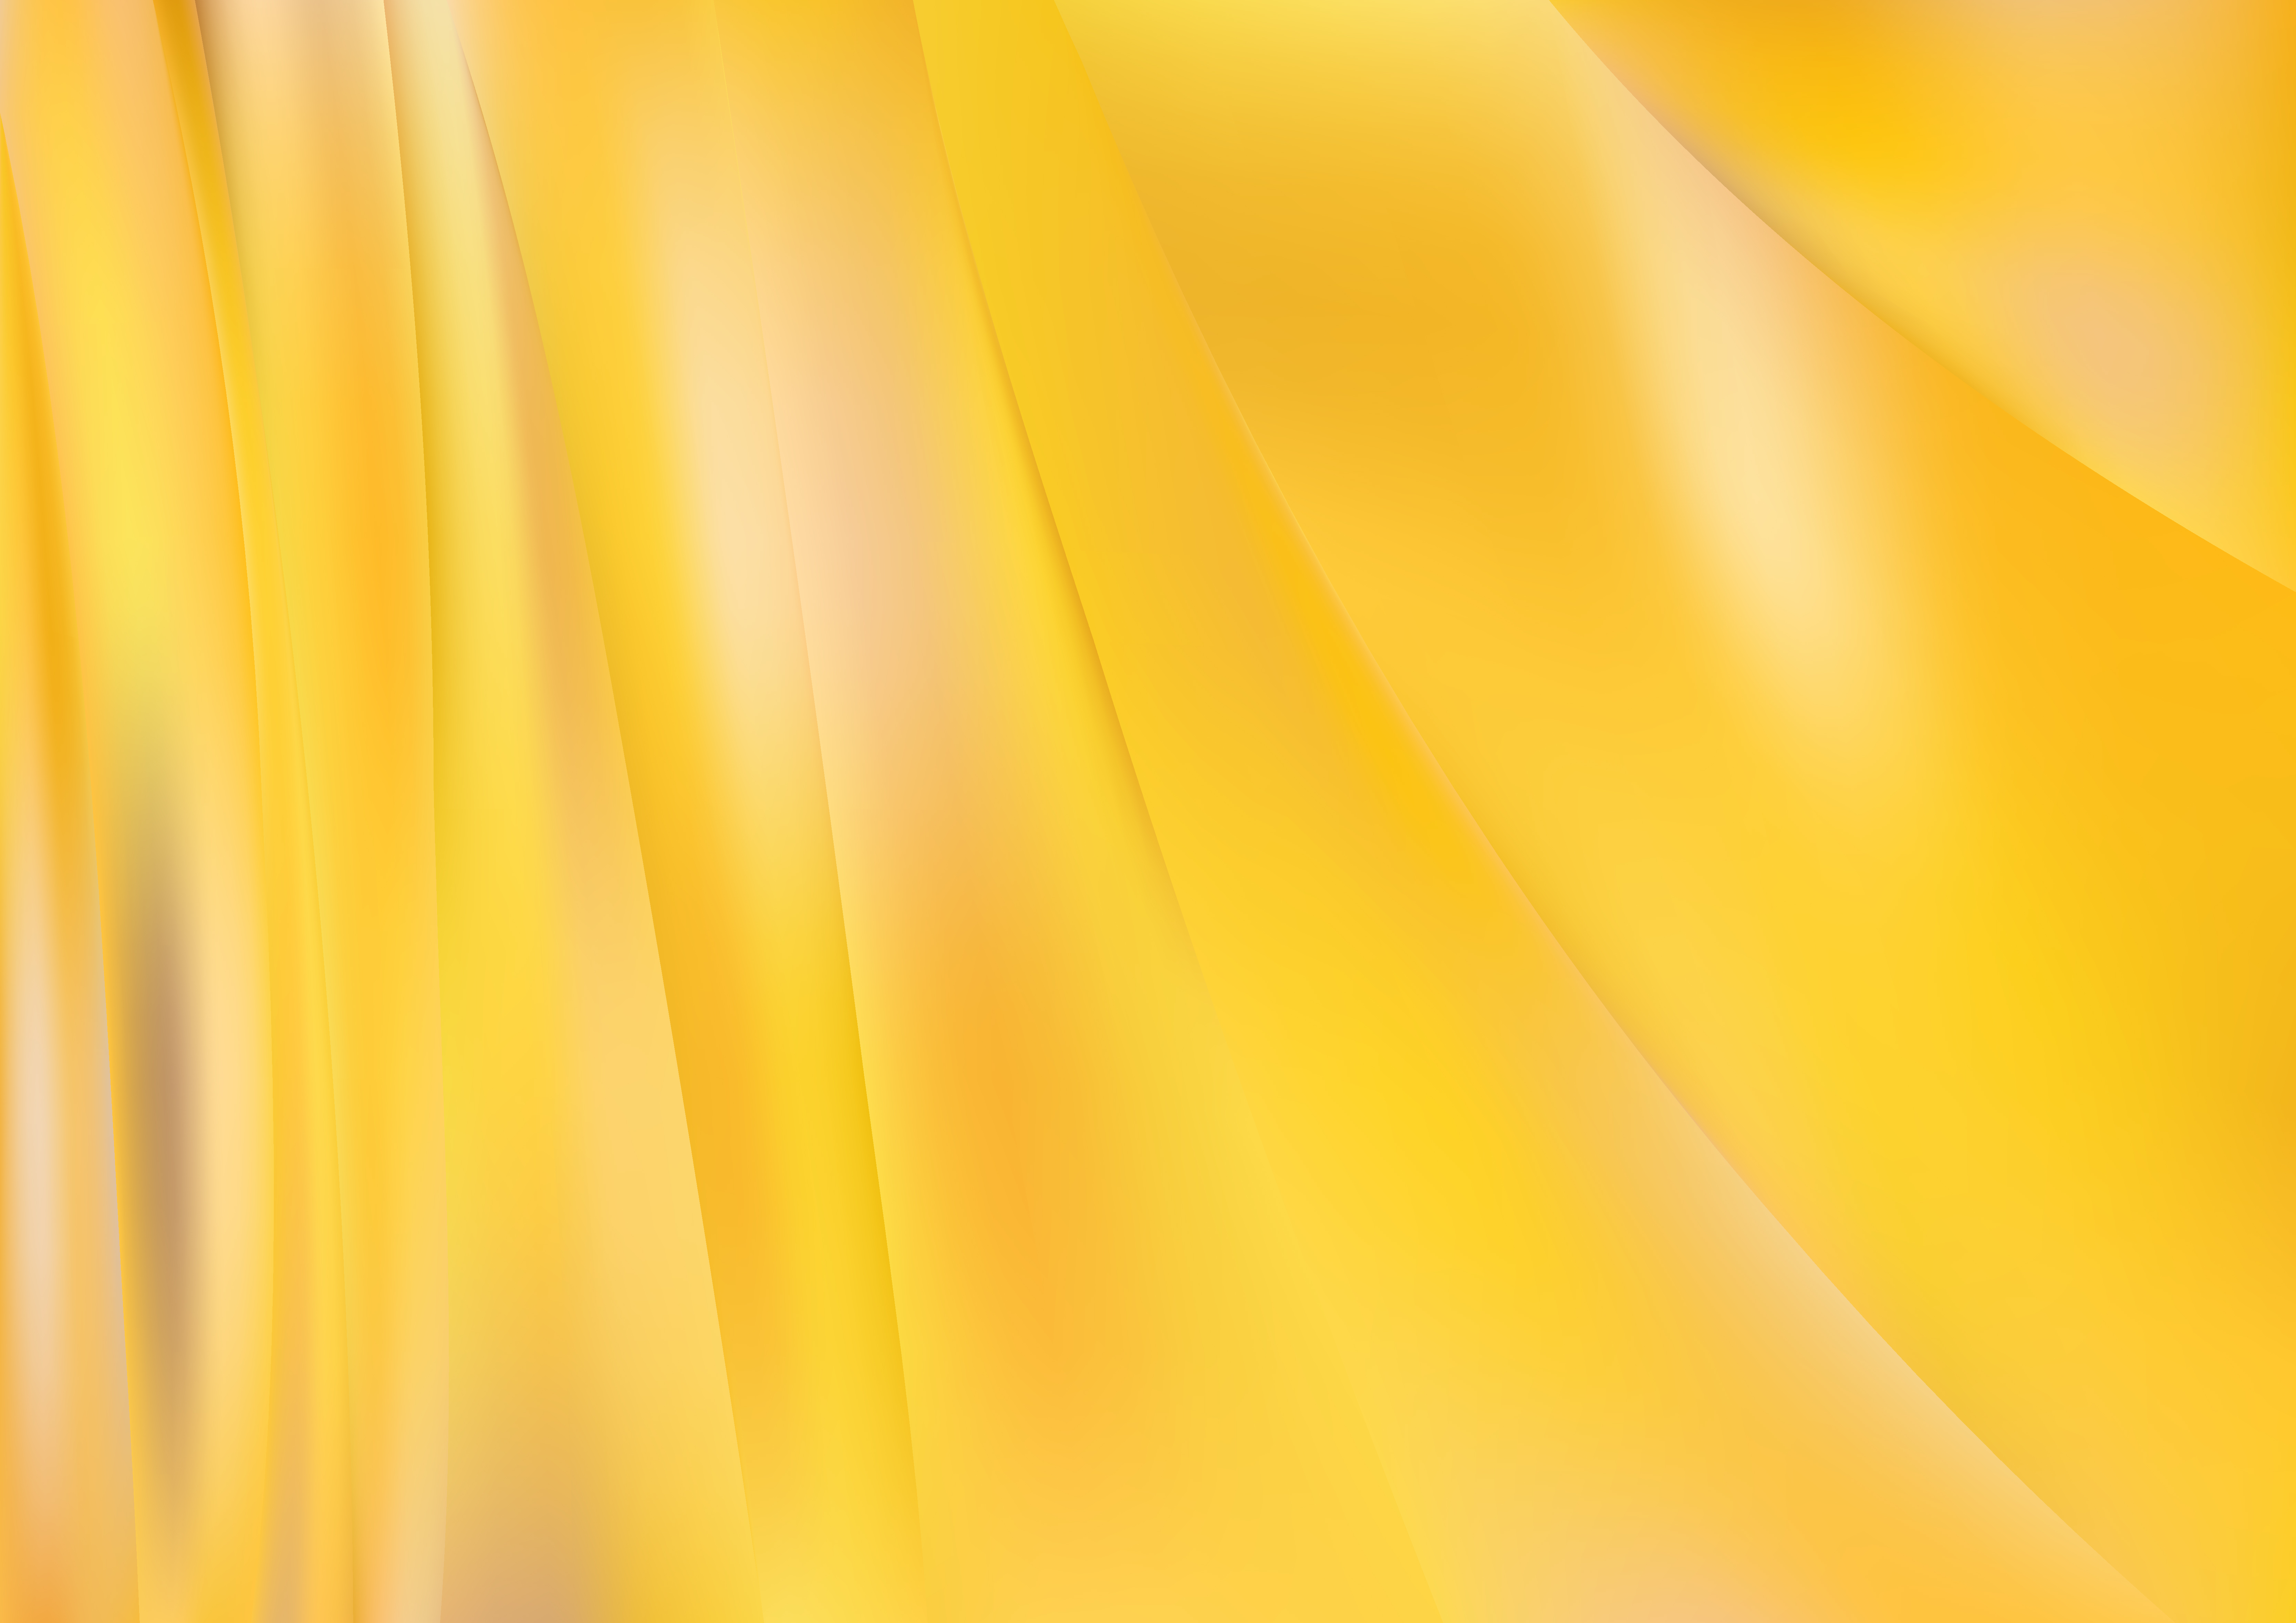 Free Dark Yellow Shiny Abstract Background Vector Image